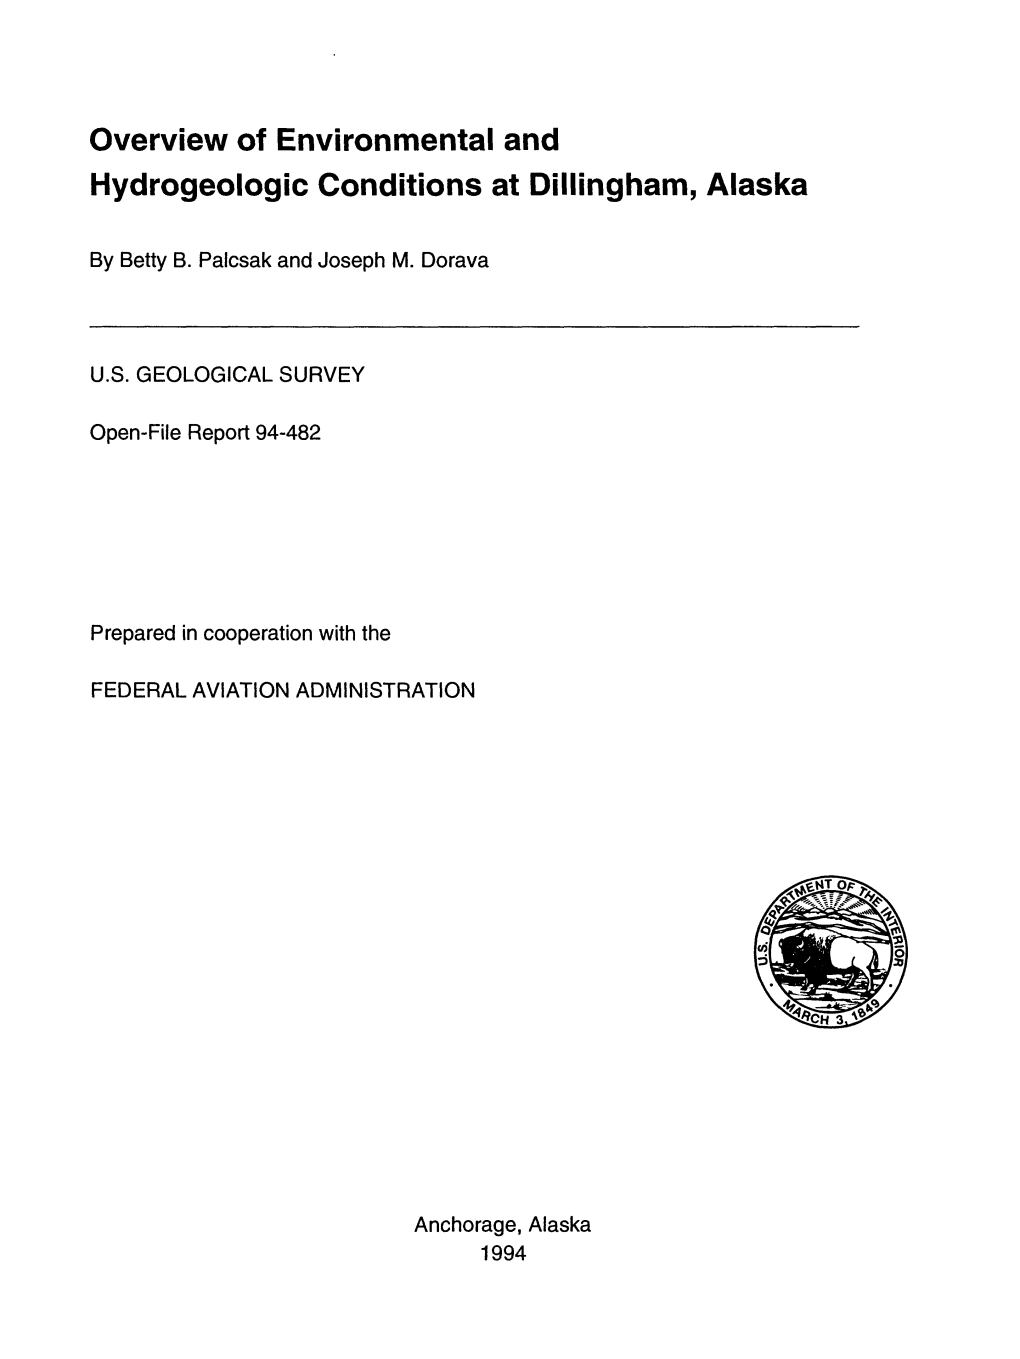 Overview of Environmental and Hydrogeologic Conditions at Dillingham, Alaska